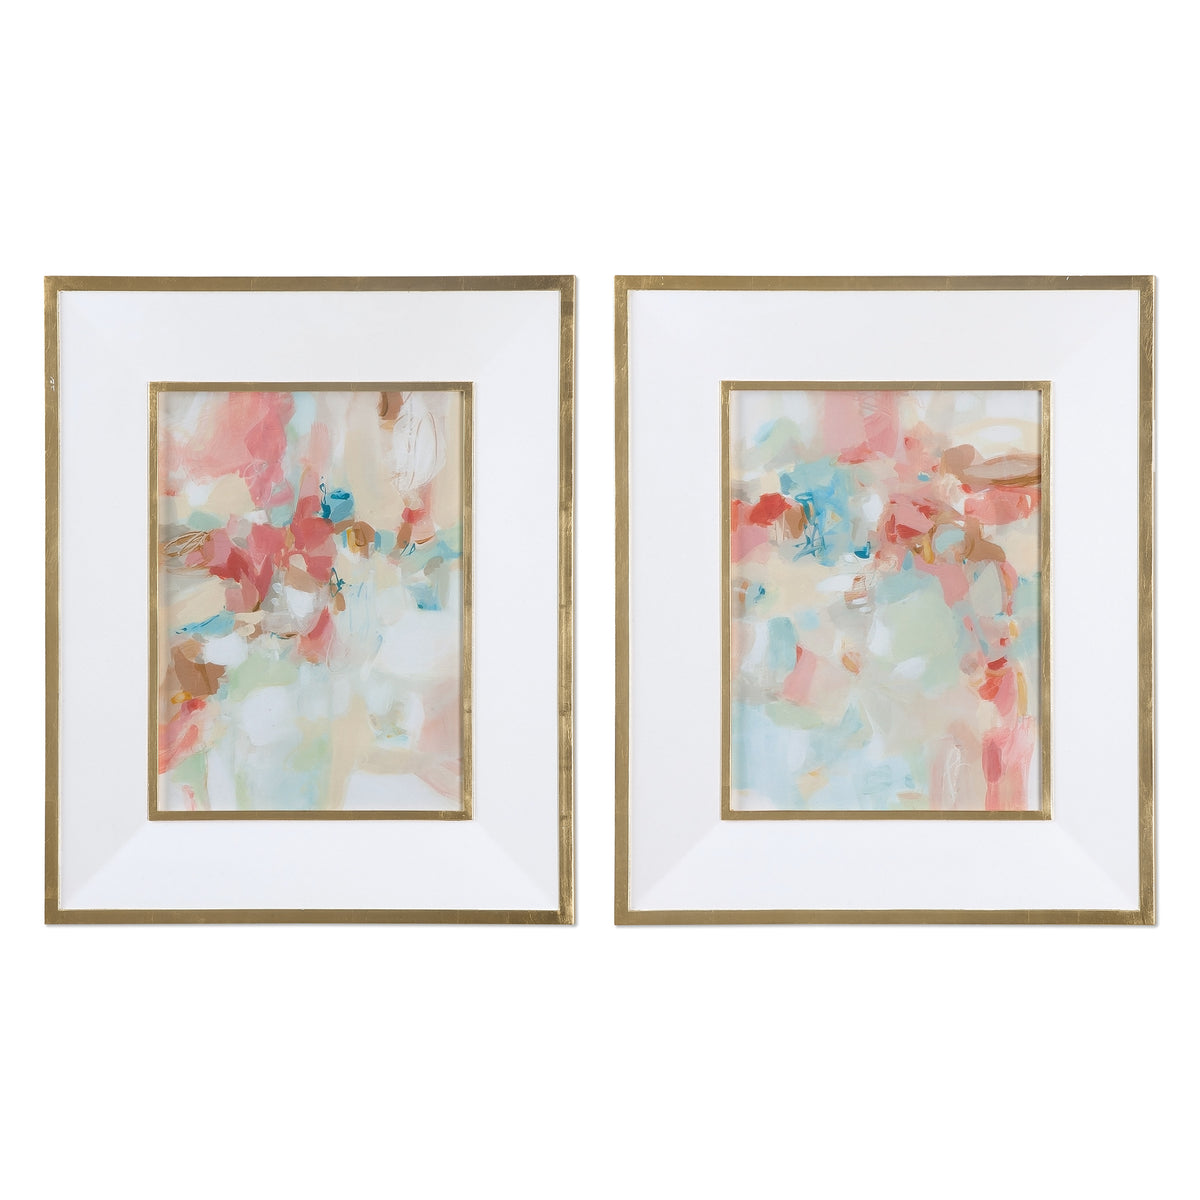 A Touch of Blush and Rosewood Fences Framed Prints, S/2